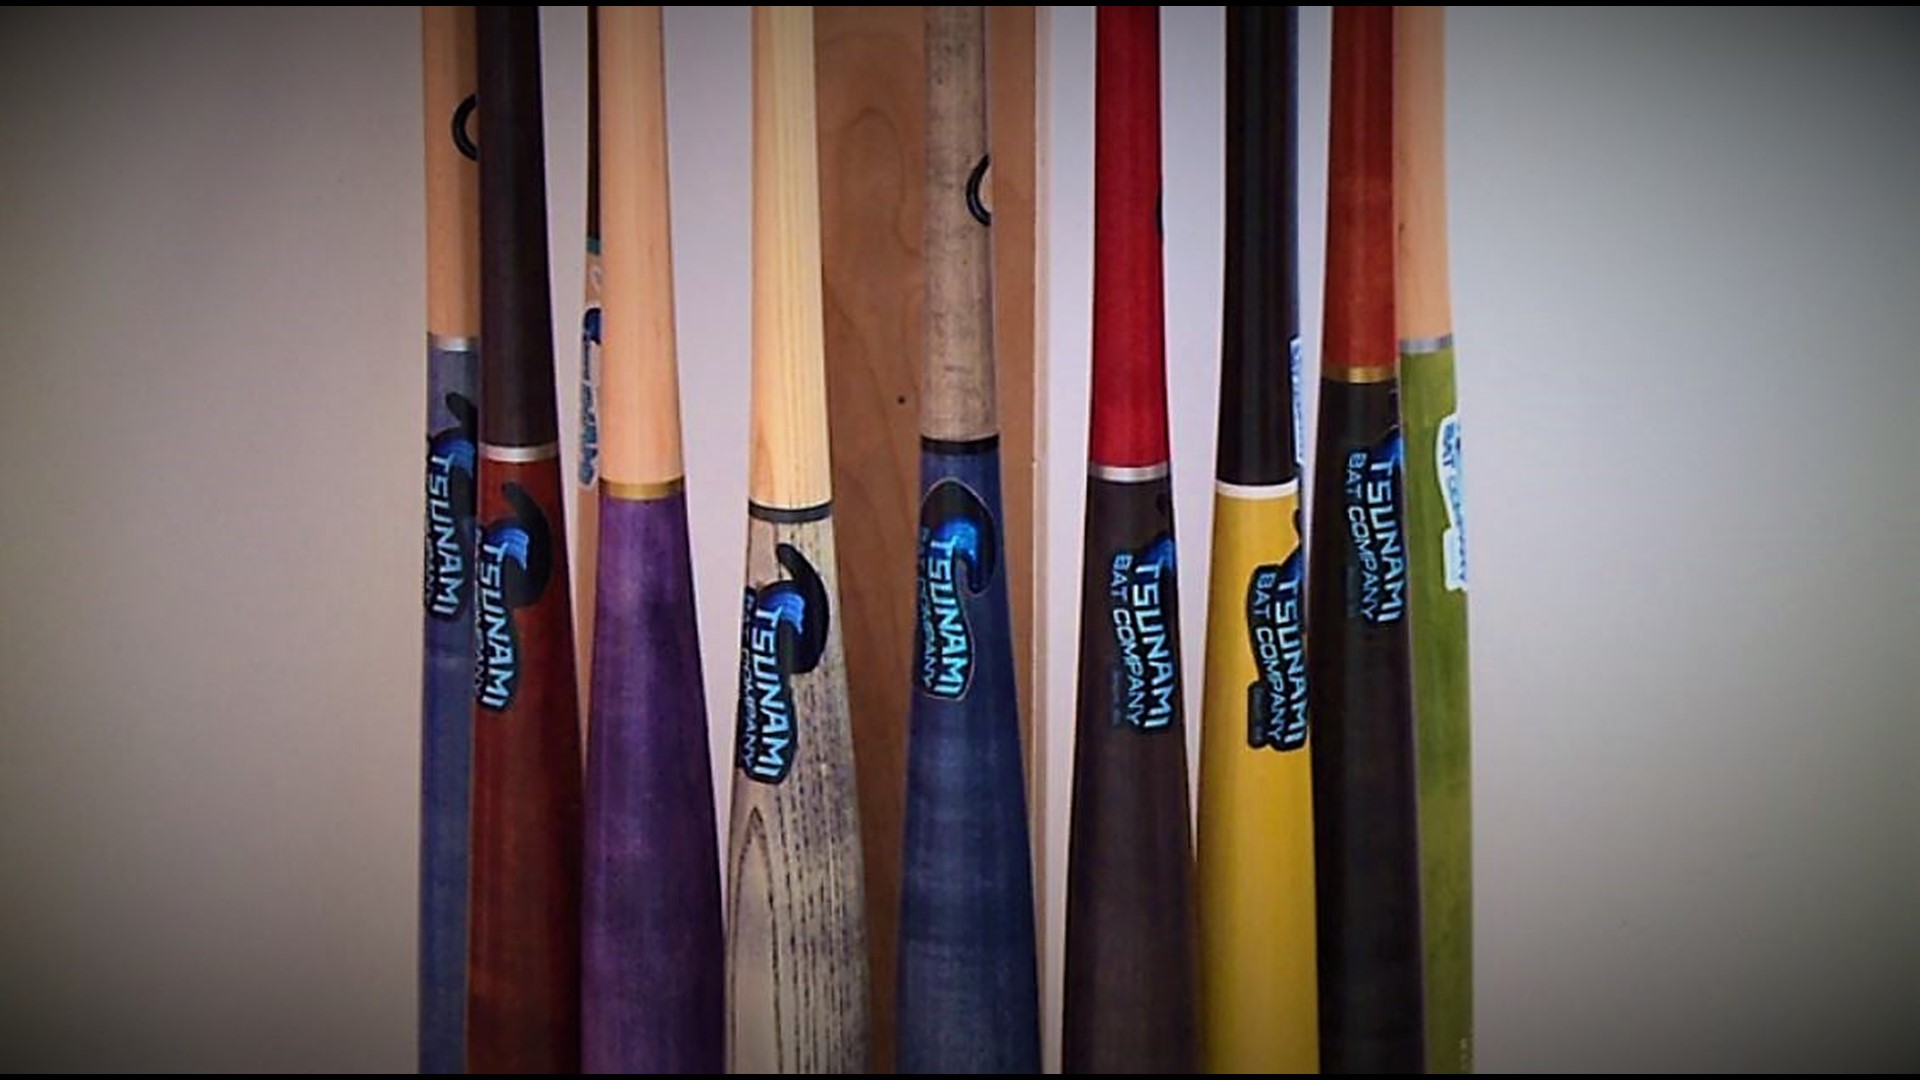 Colorful custom baseball bats made in the PNW are hitting it out of the park.